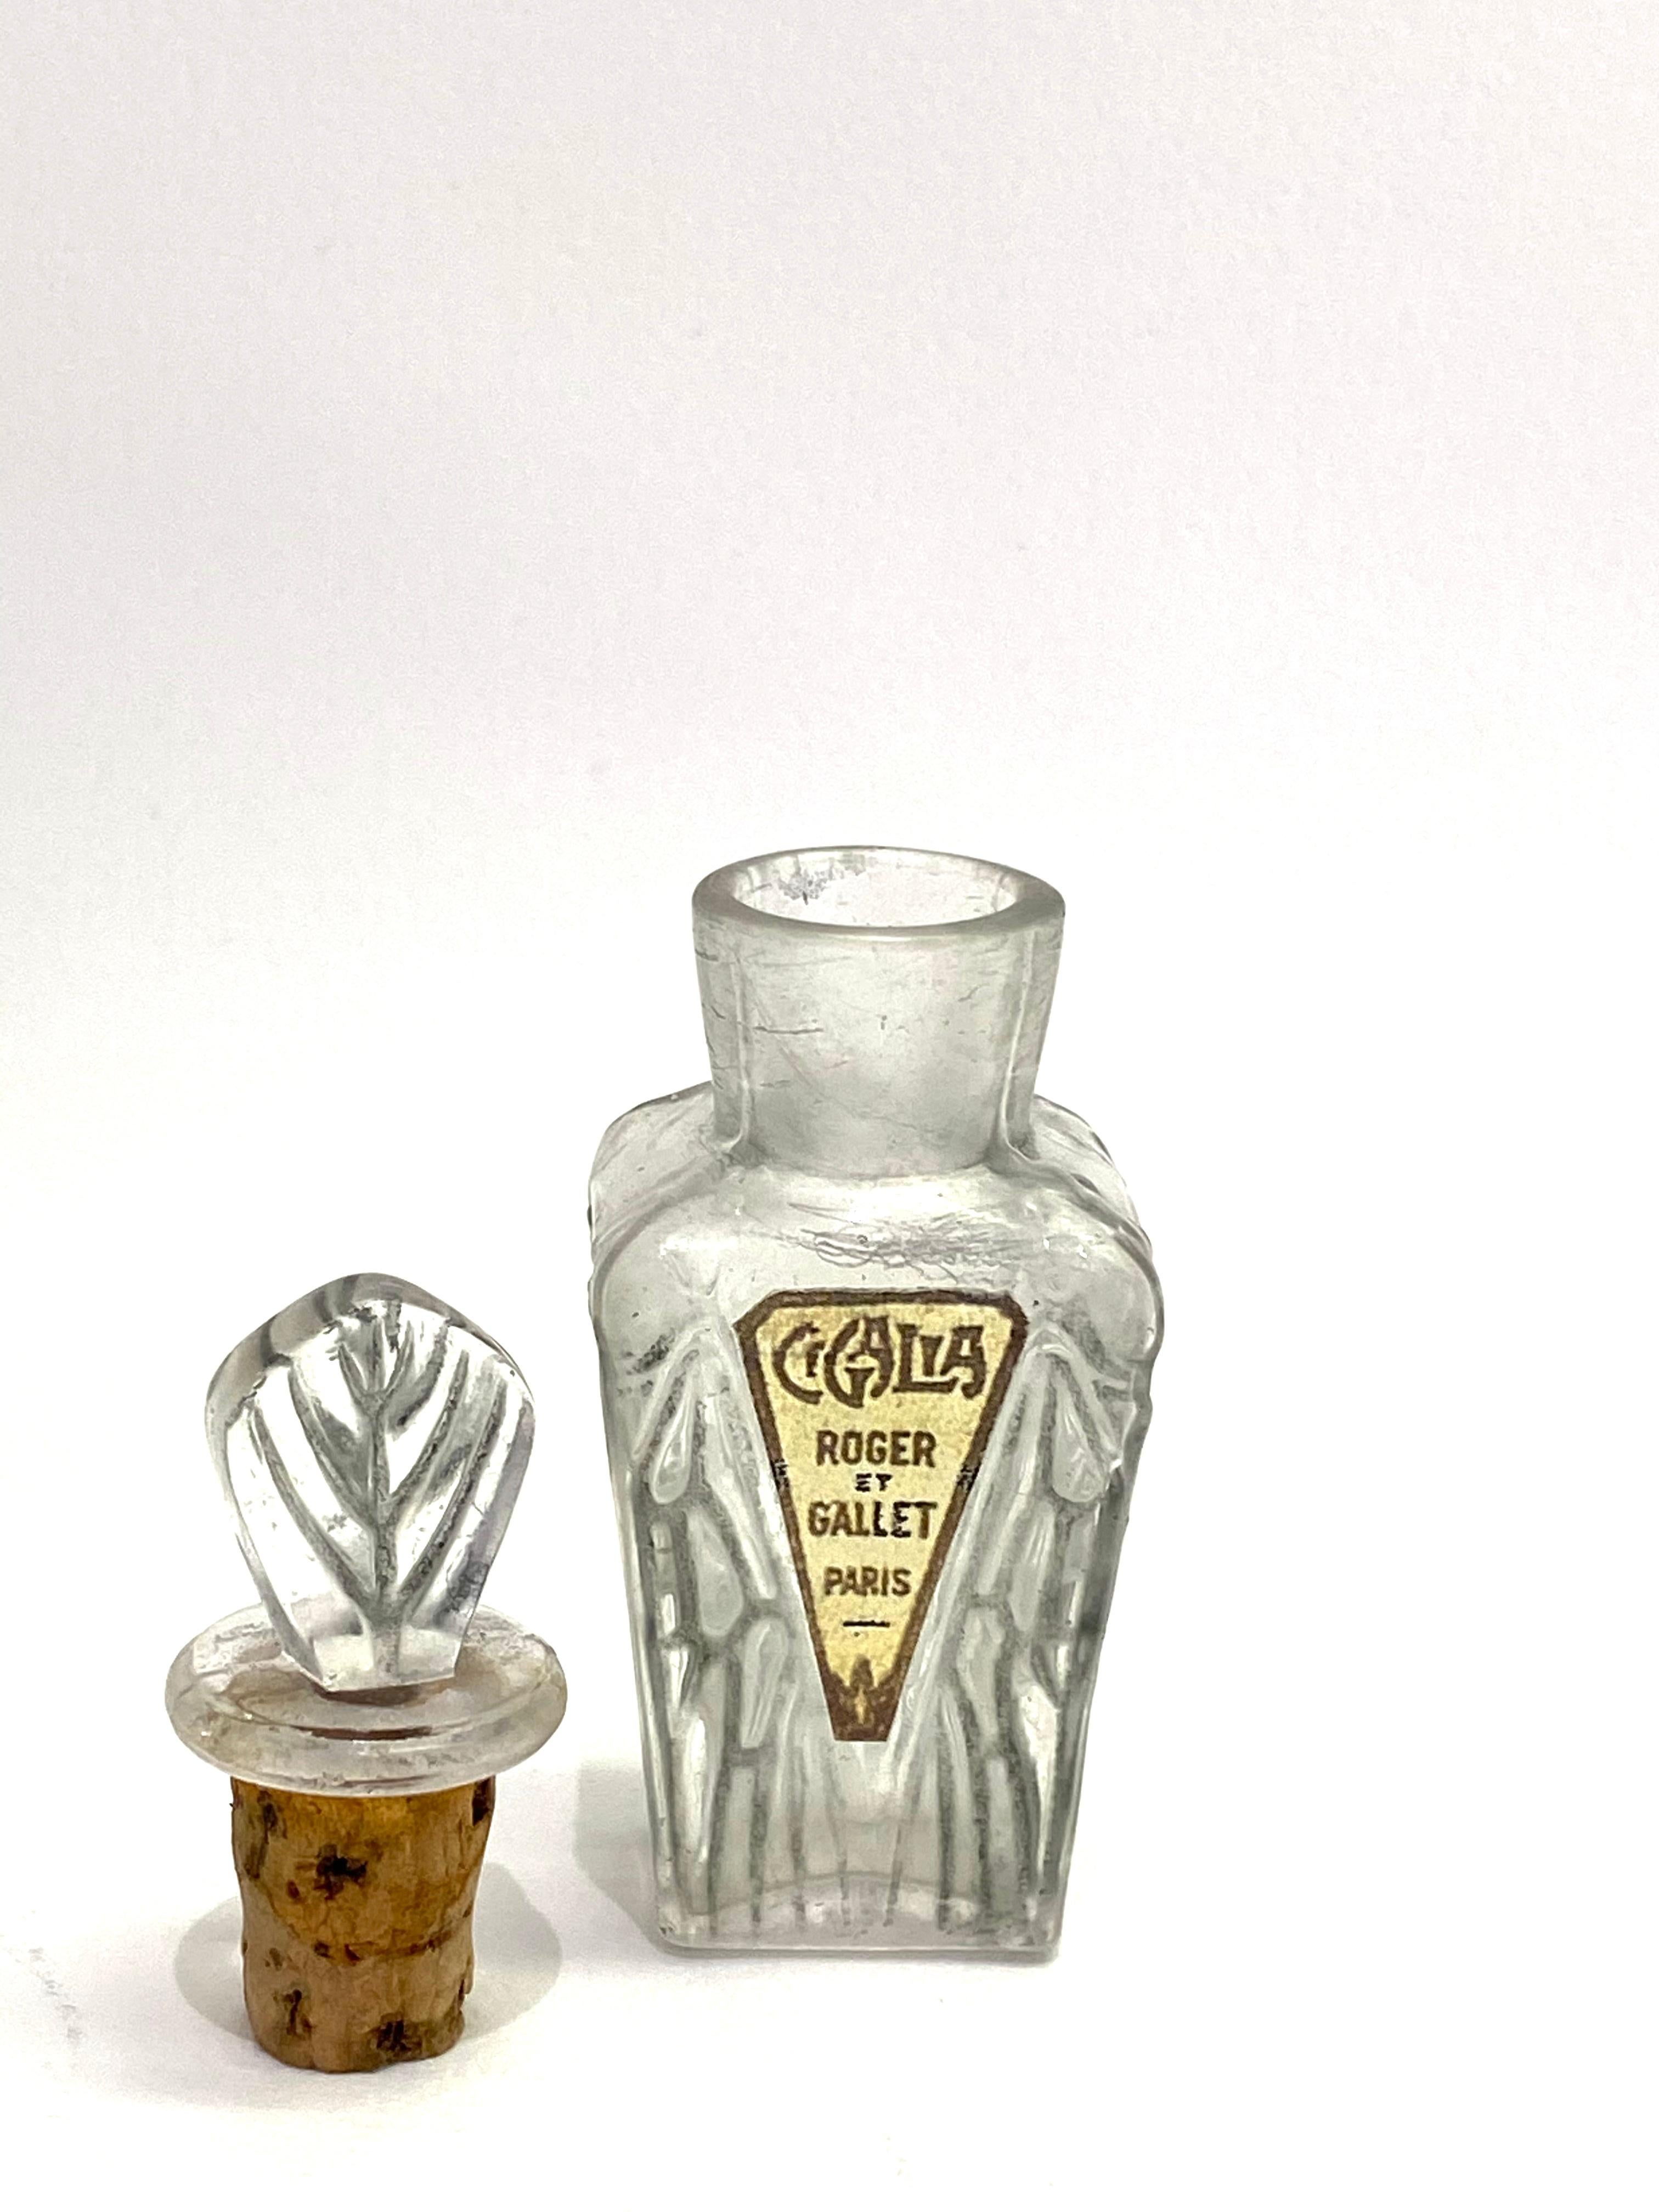 Art Deco 1924 Rene Lalique Cigalia Roger & Gallet Perfume Bottle Grey Stained Glass